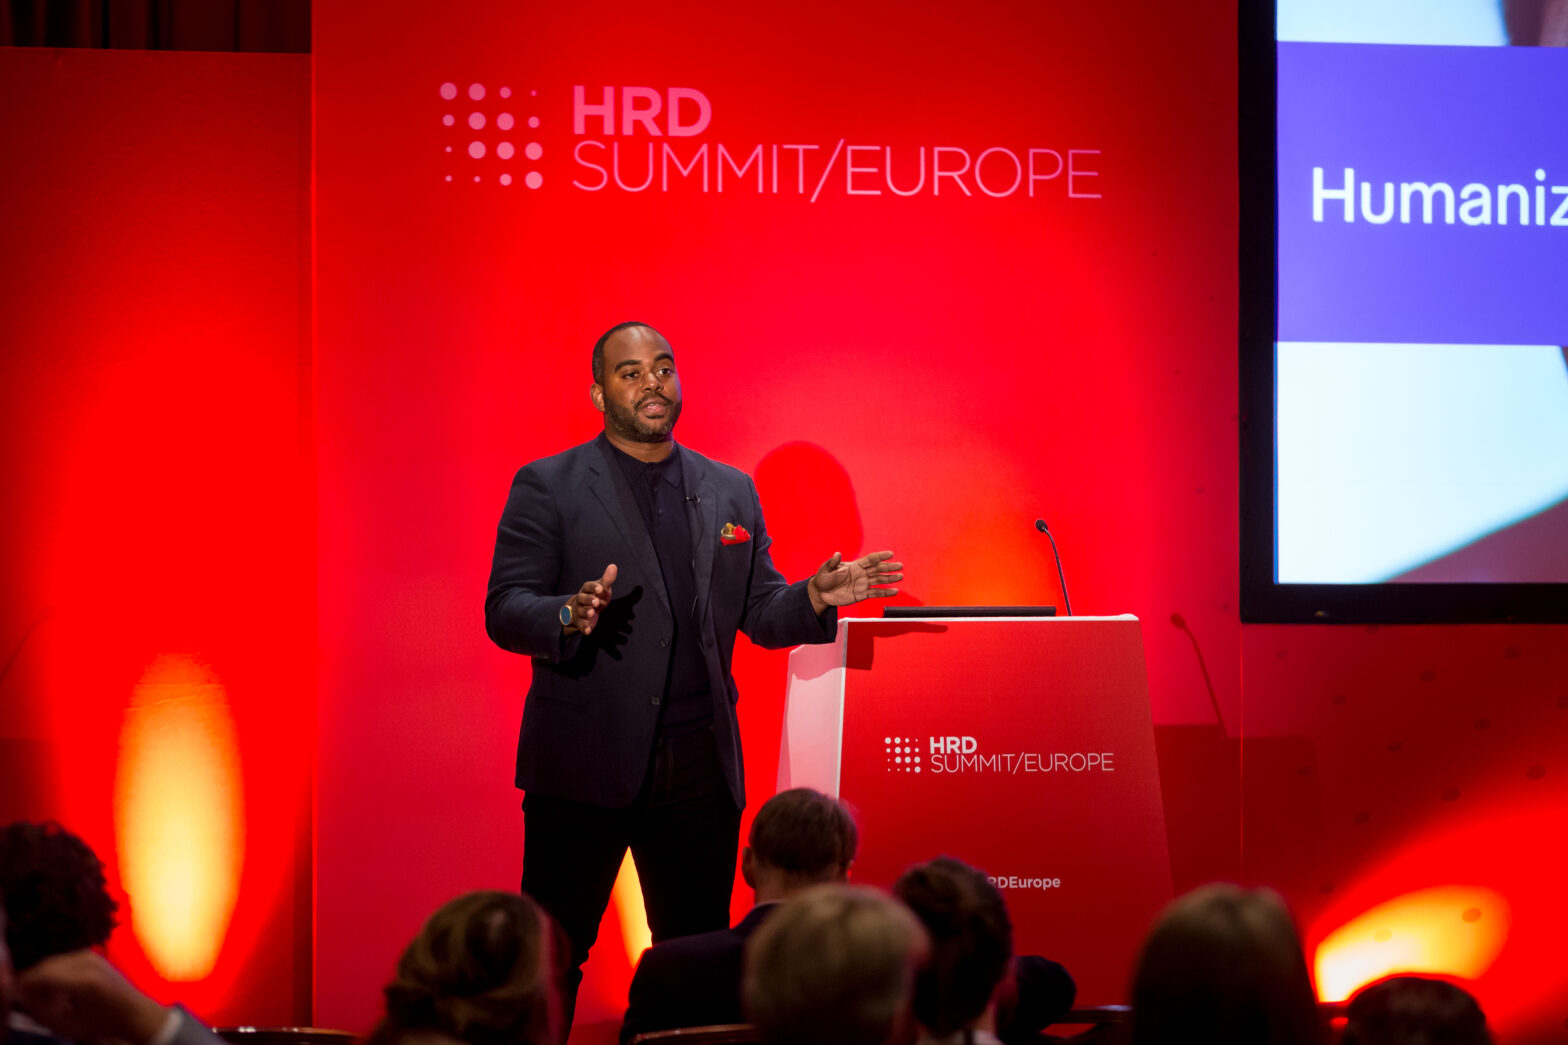 HRD Summit/Europe 2017: Transformation of HR and Humanising diversity